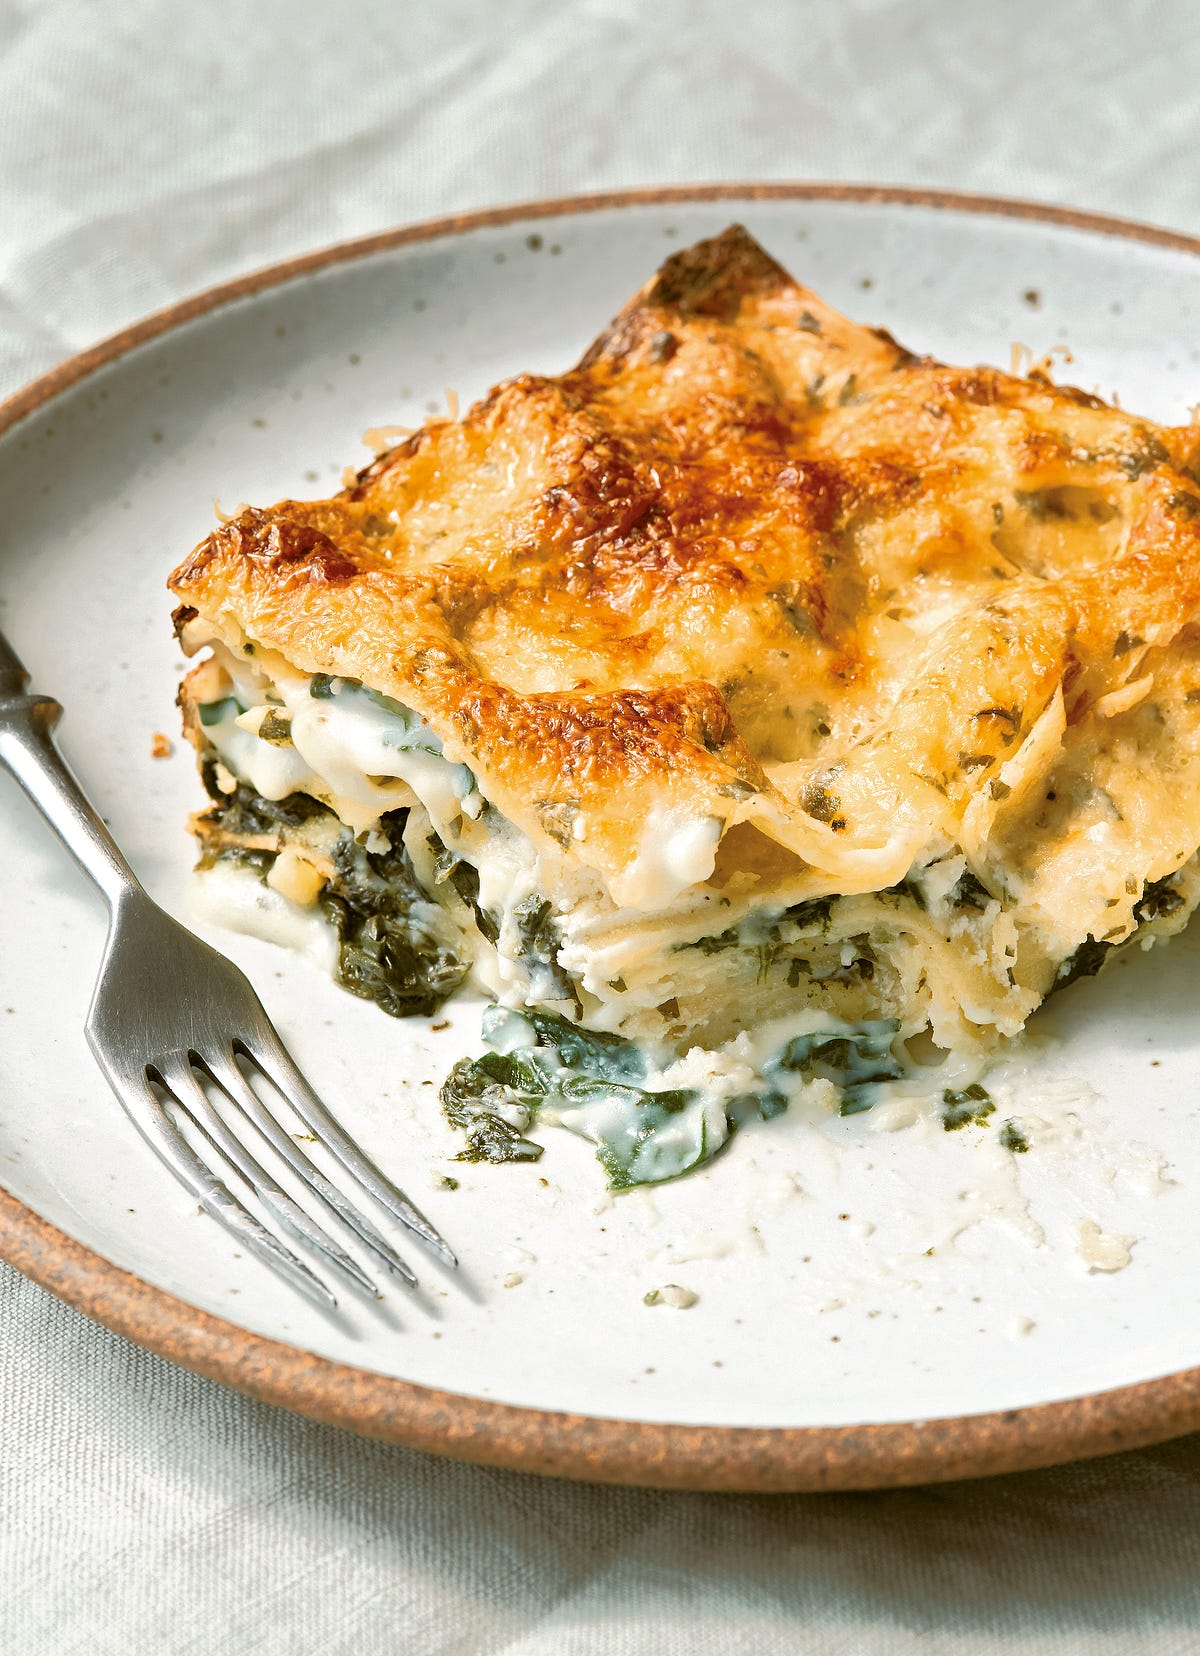 Make This Green Lasagne – Heated